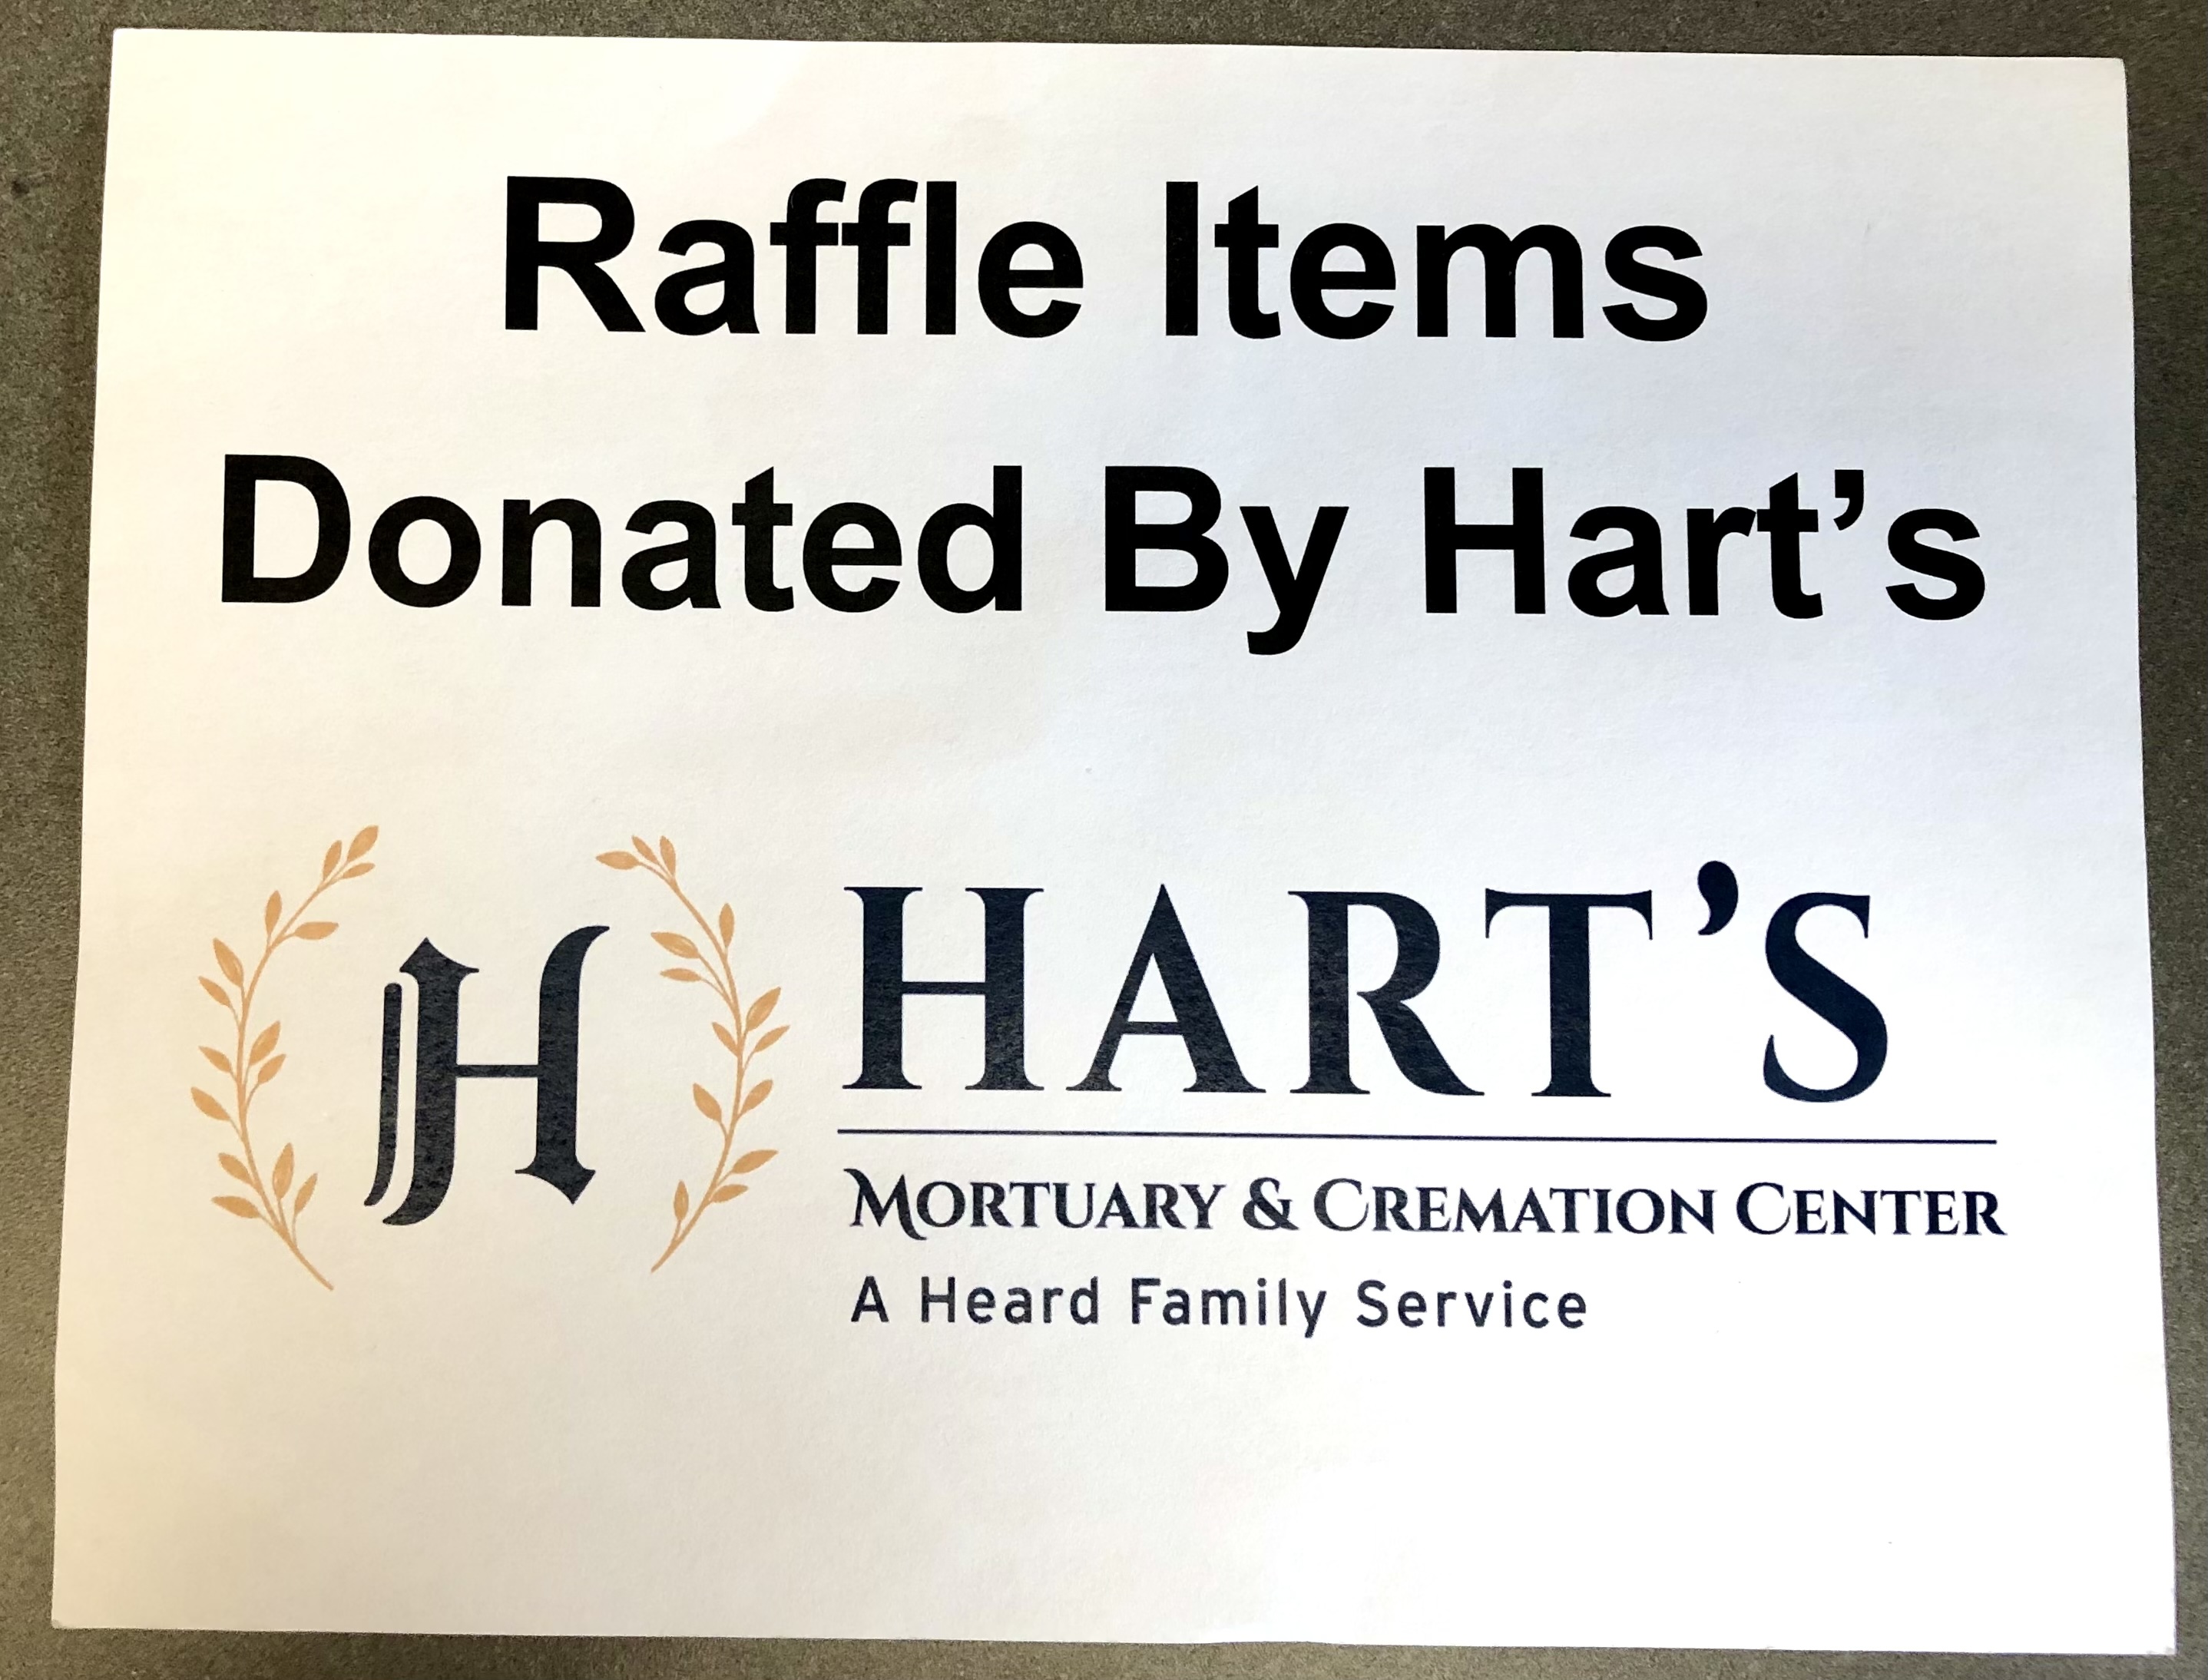 Raffle Items Donated by Hart's!!!